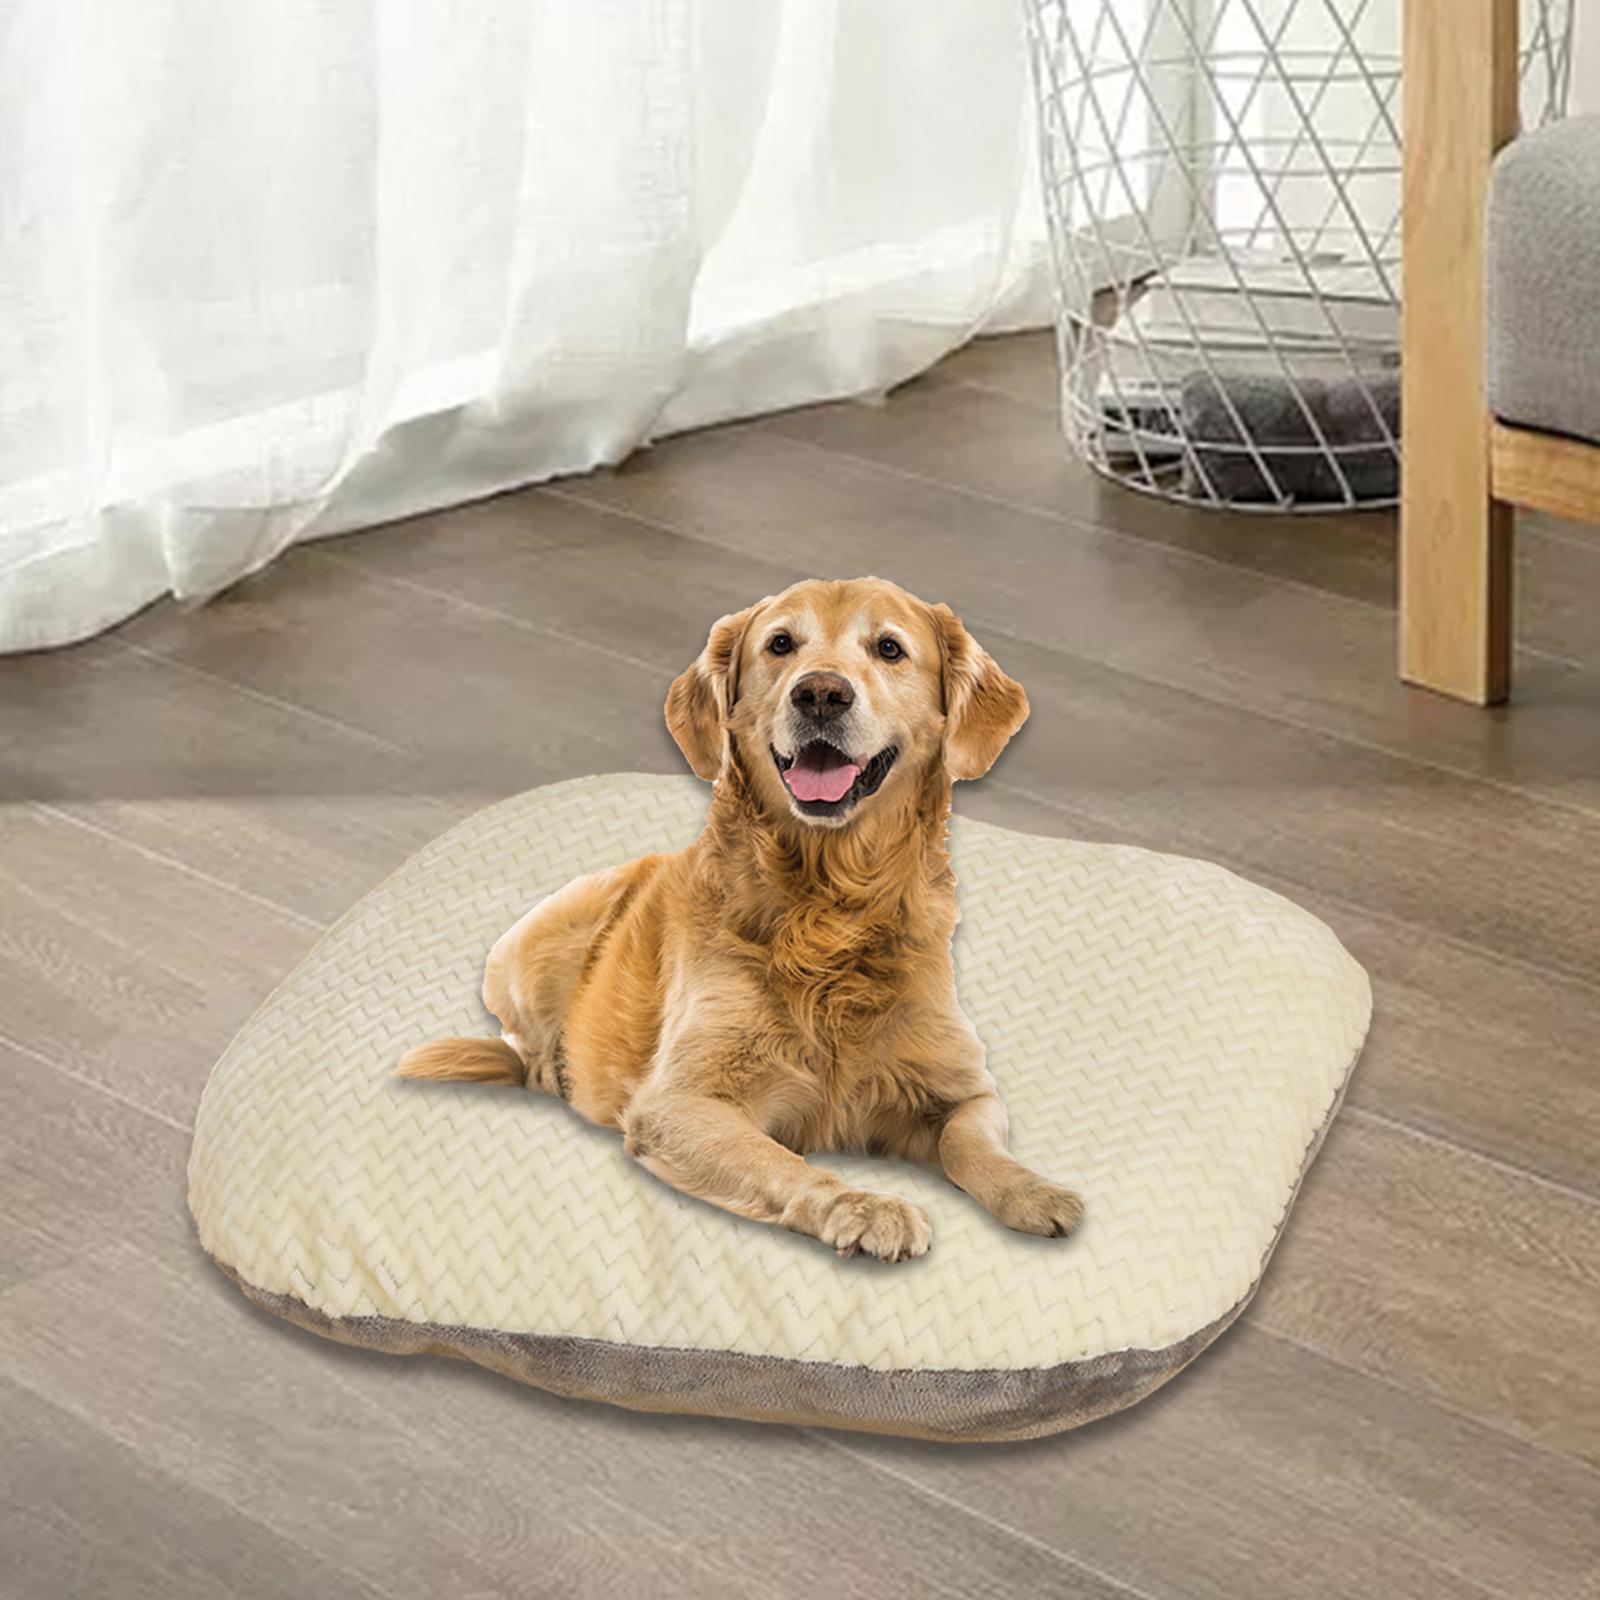 Pet Sleeping Mat Pet Bed Comfortable Breathable Warm Soft Pet Sleeping Dog Bed Kennel Pad for Puppy Cats Rabbits, Dogs Kitten